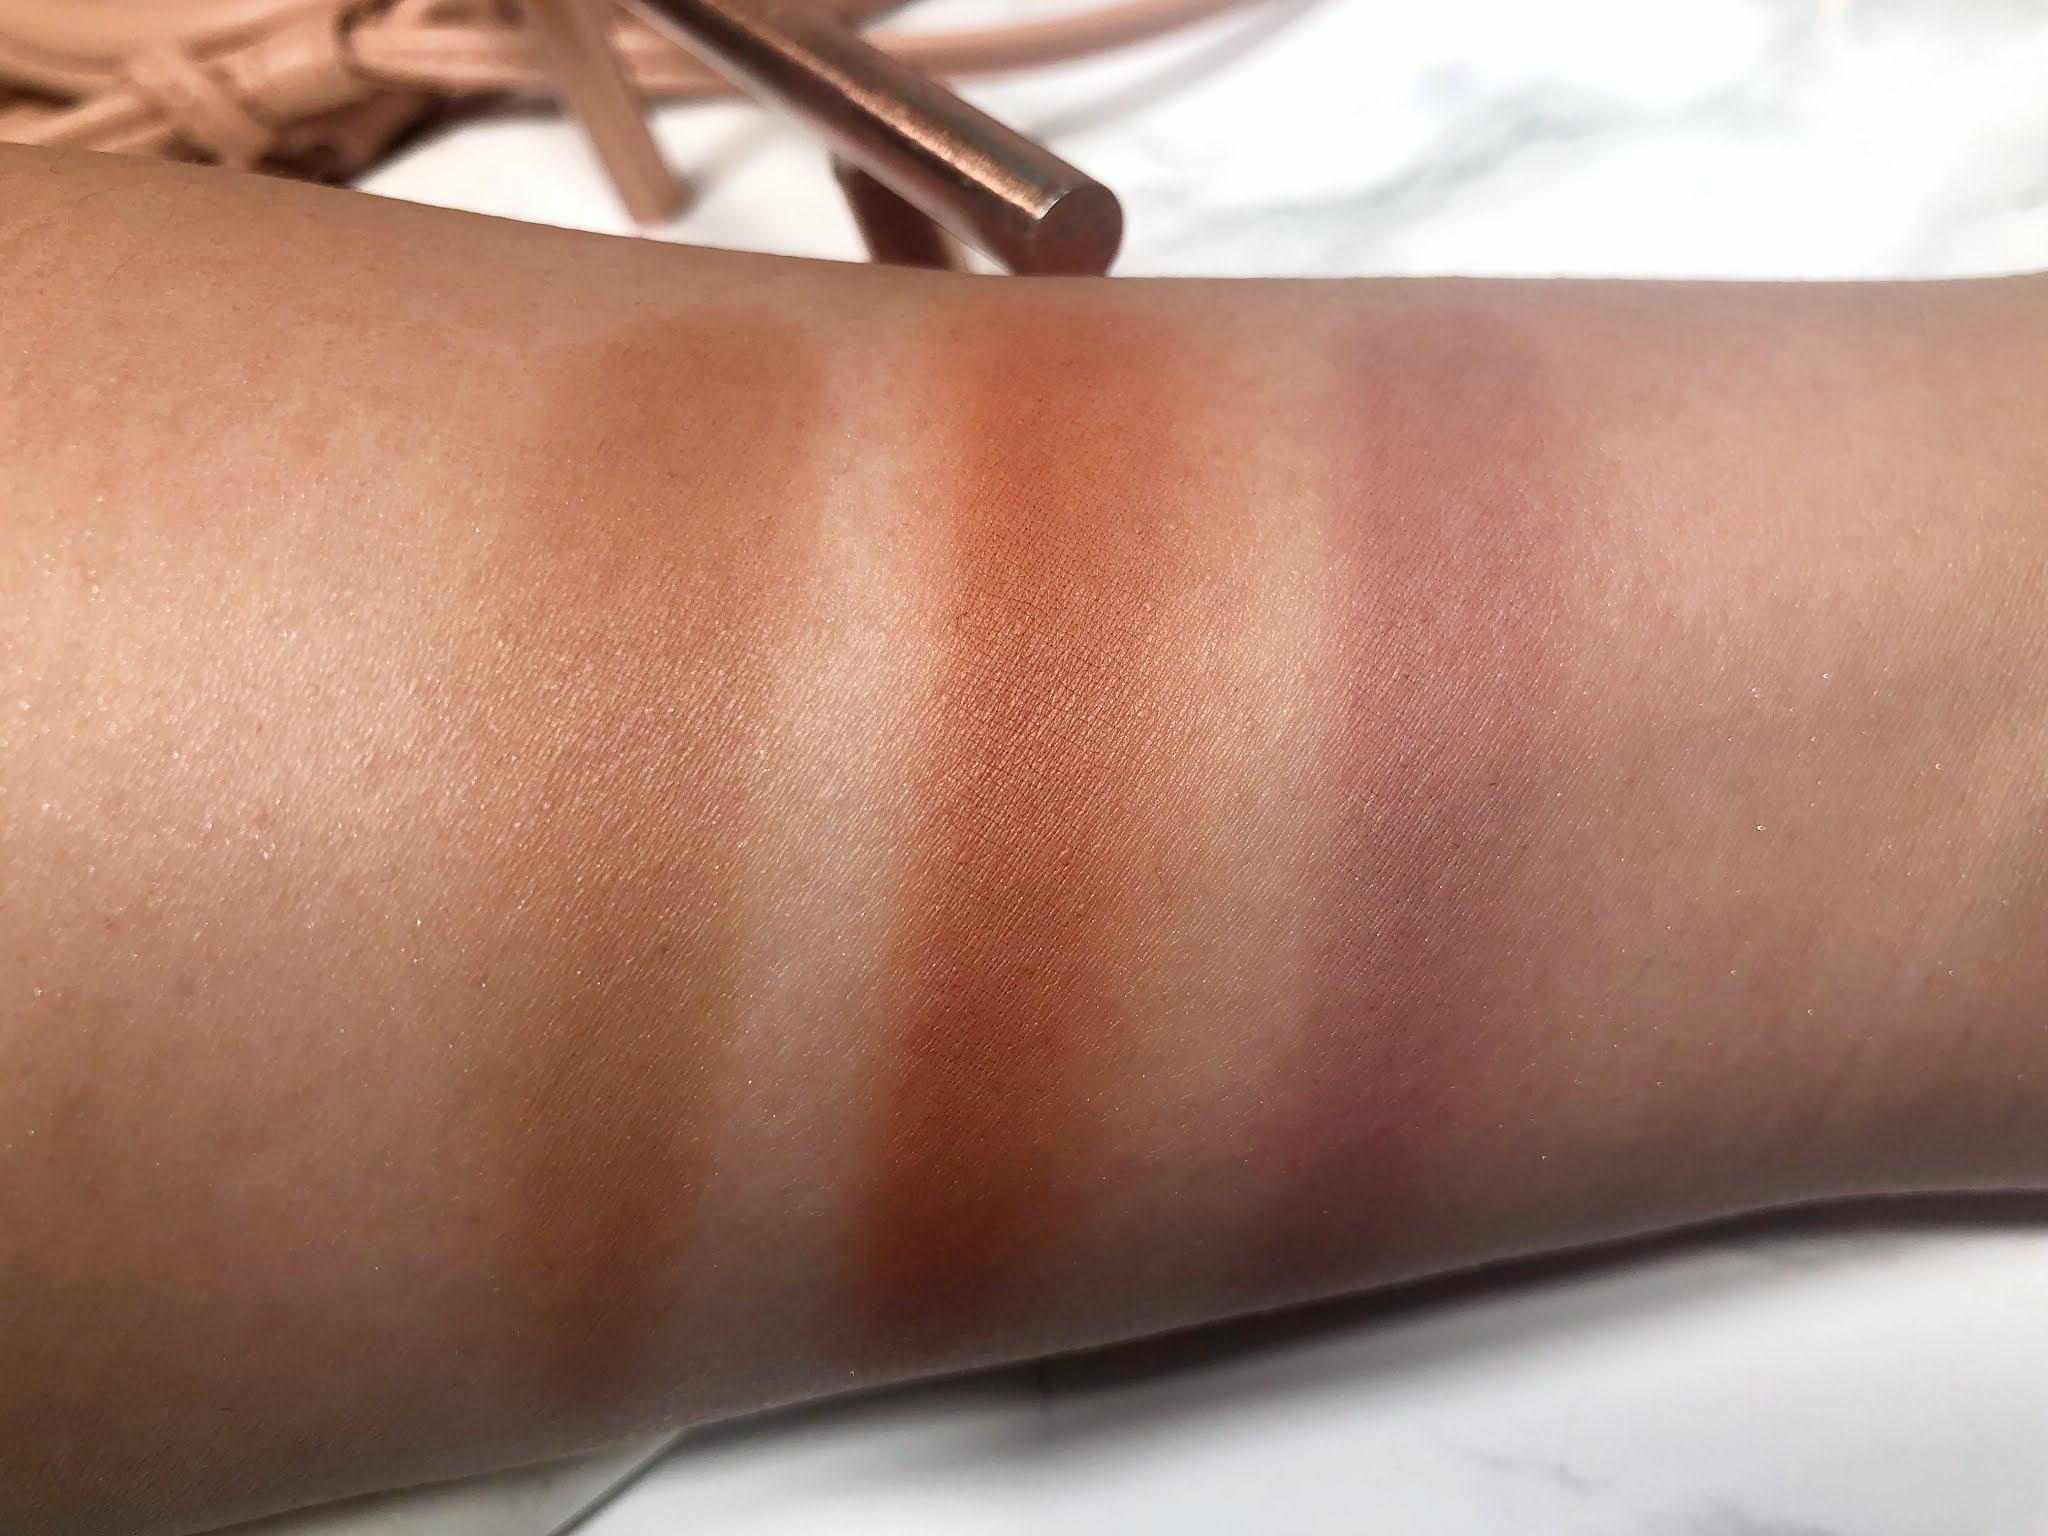 Giorgio Armani Neo Nude Melting Color Balm Review and Swatches